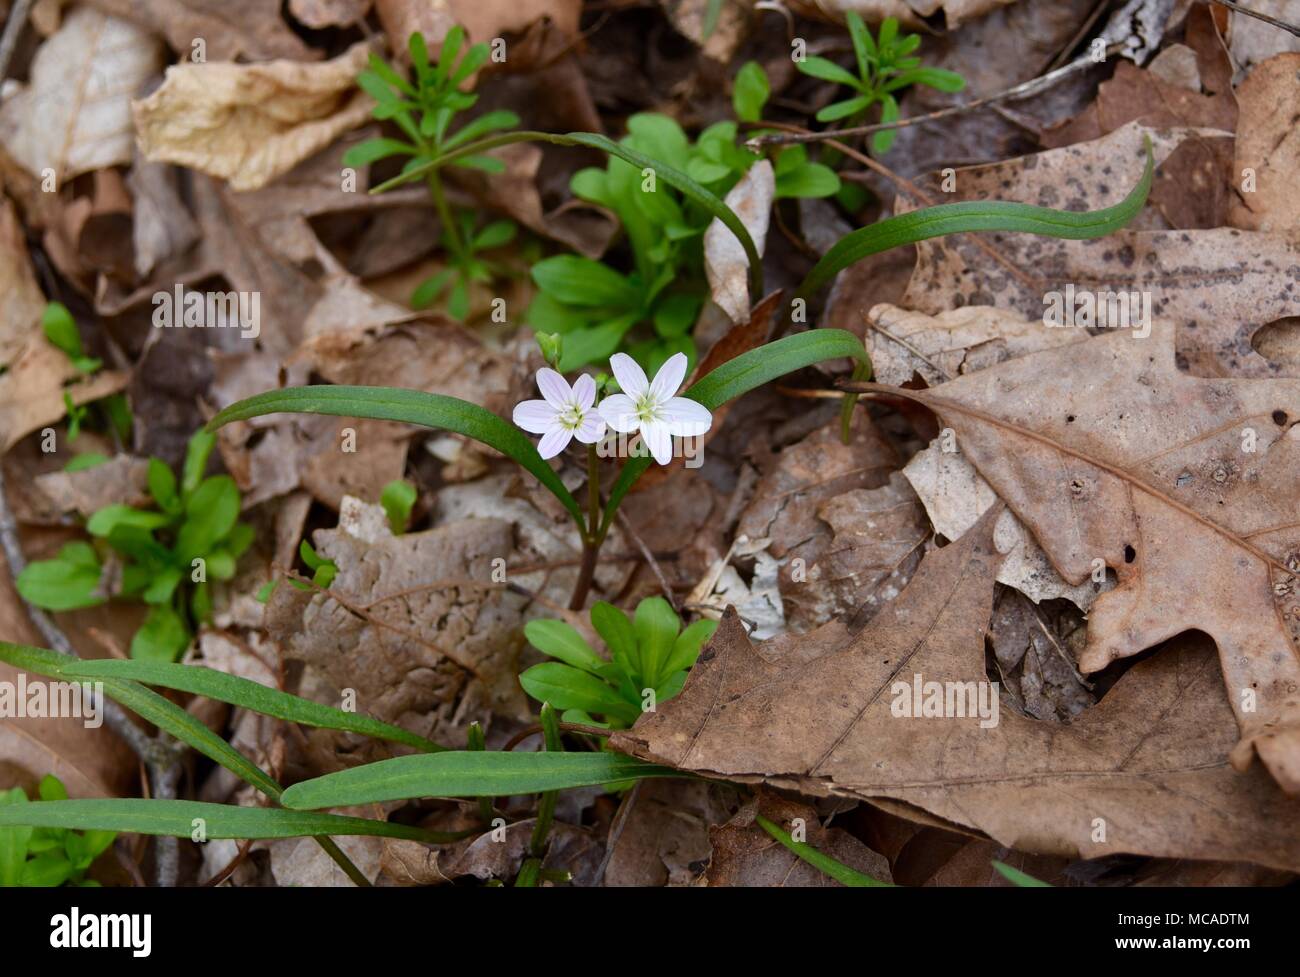 A pair of white spring beauty flowers emerging in a spring forest. Stock Photo